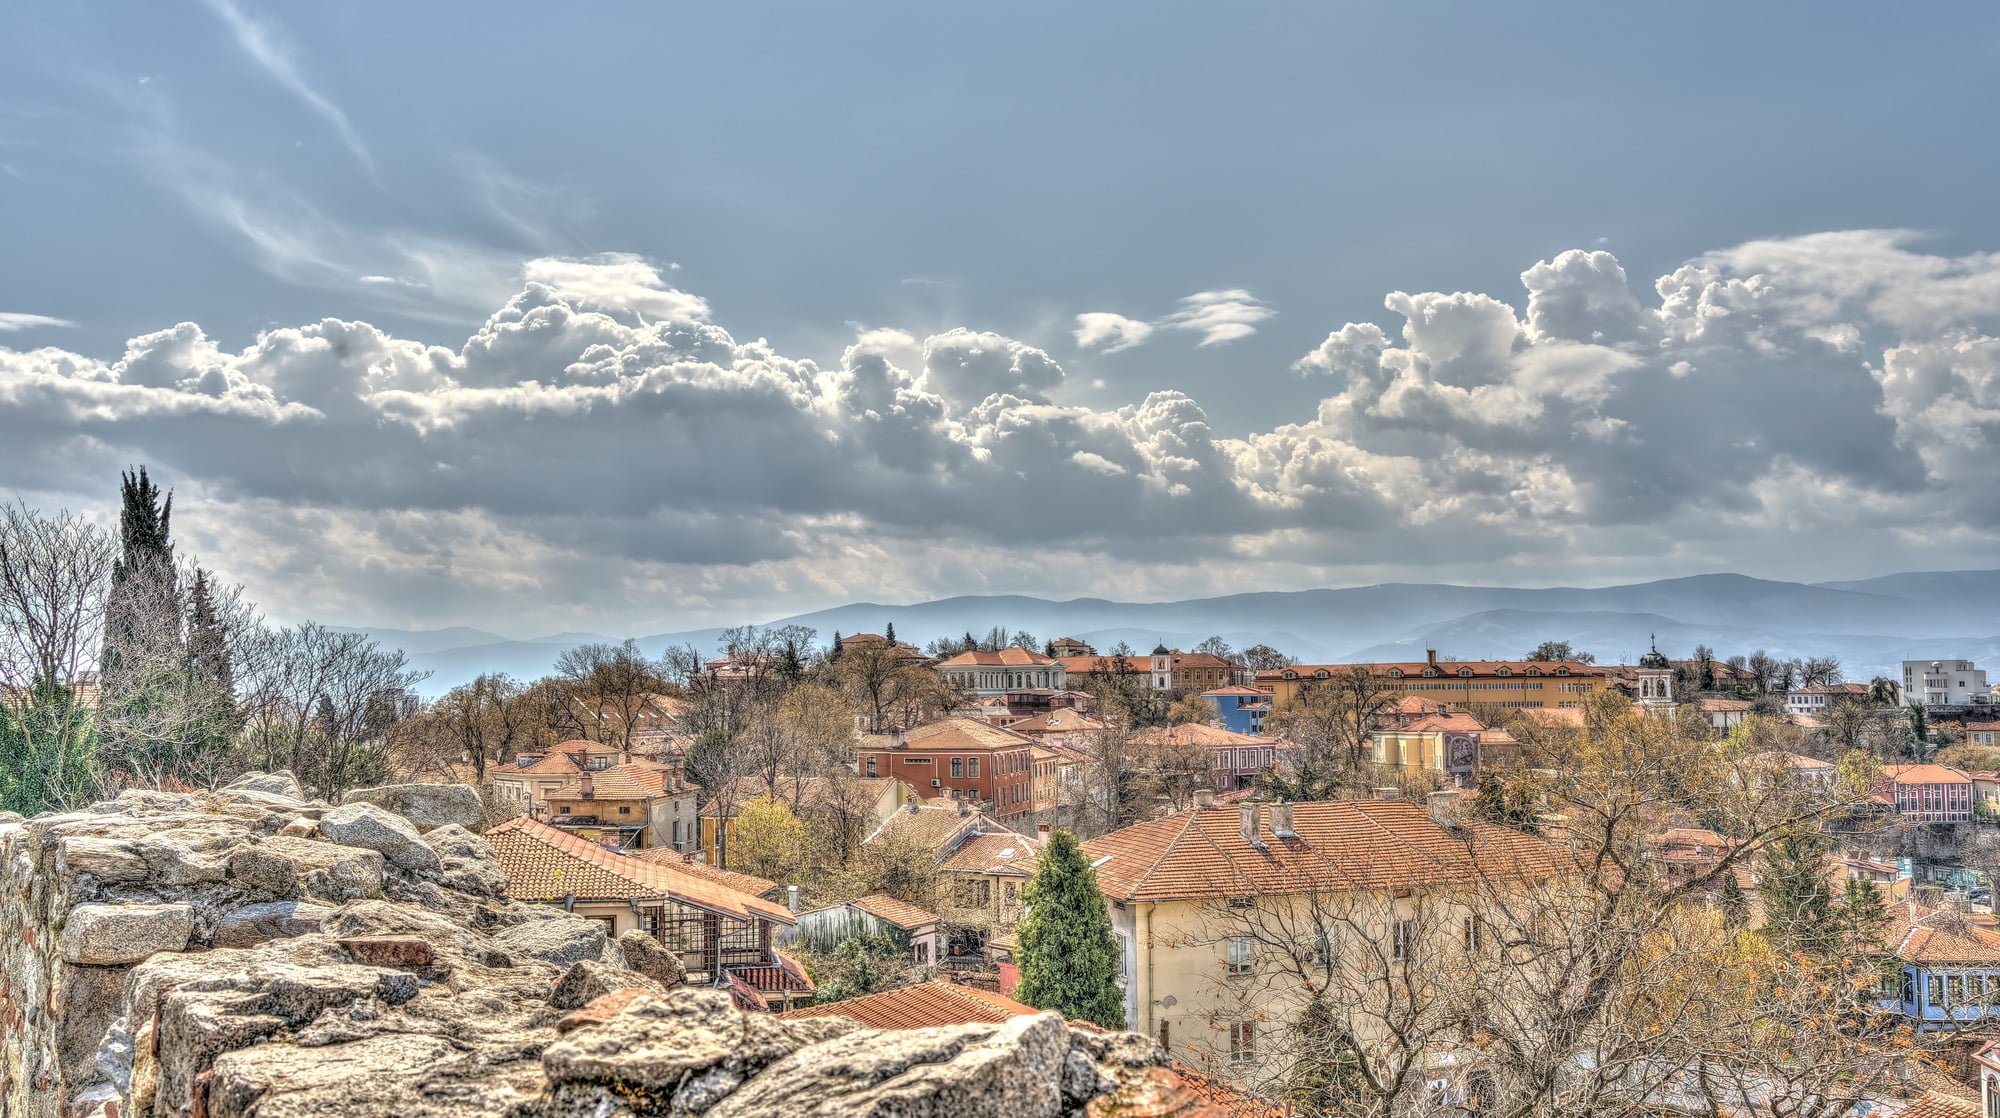 Springtime in Plovdiv is an ancient city located on seven hills in southern Bulgaria